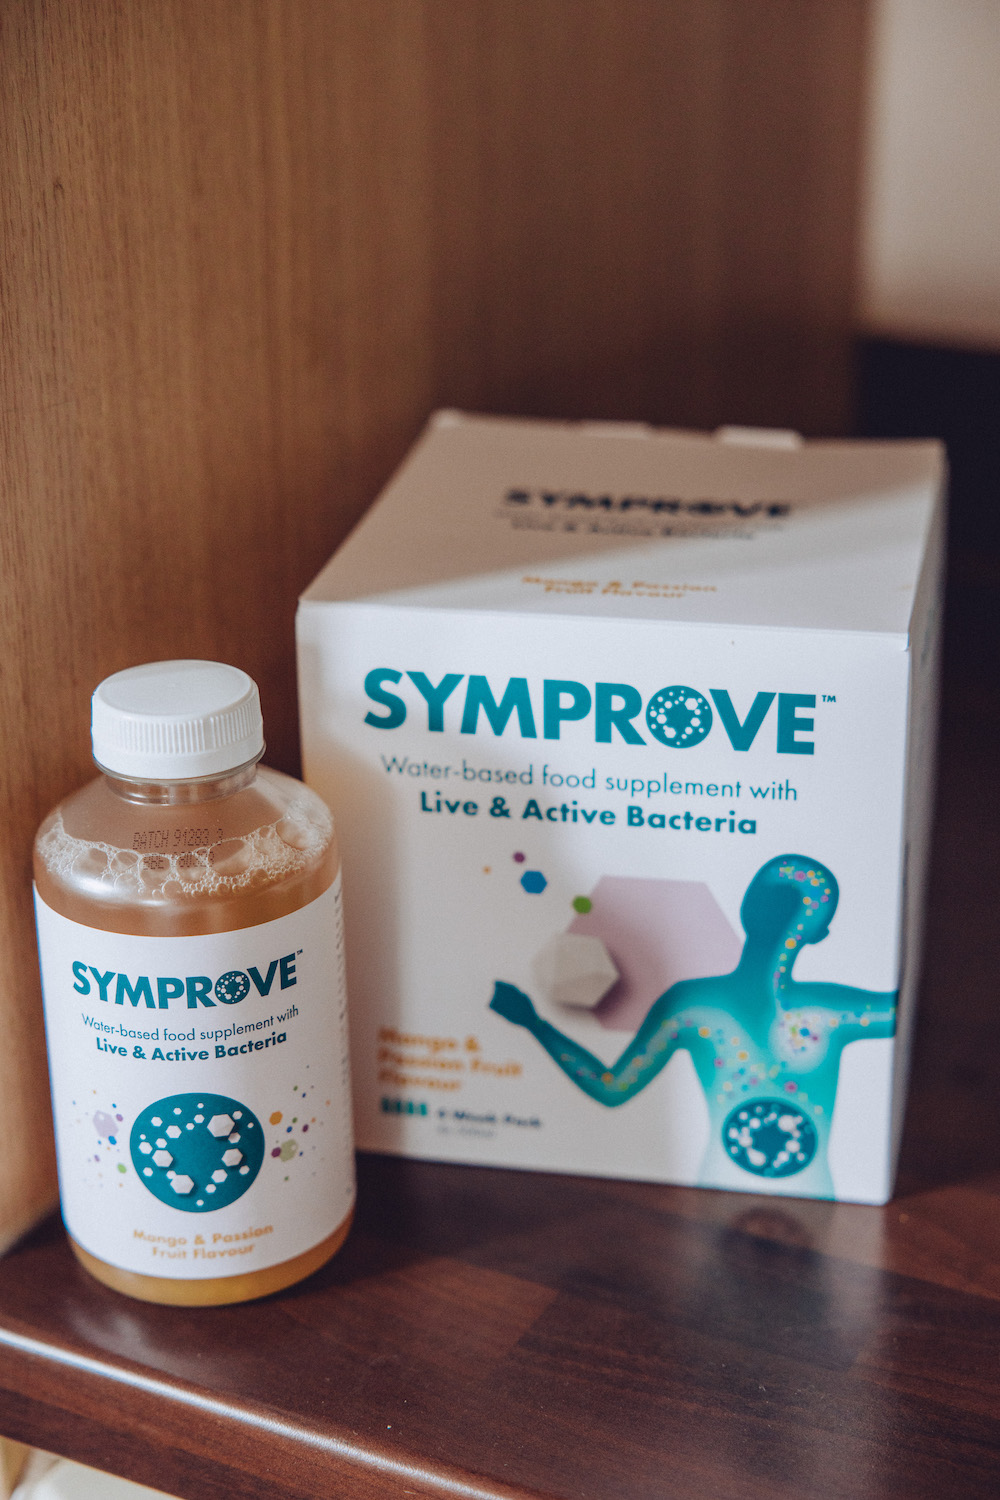 Bottle of mango and passion fruit of simprove probiotics with the box behind, sitting on a kitchen counter 